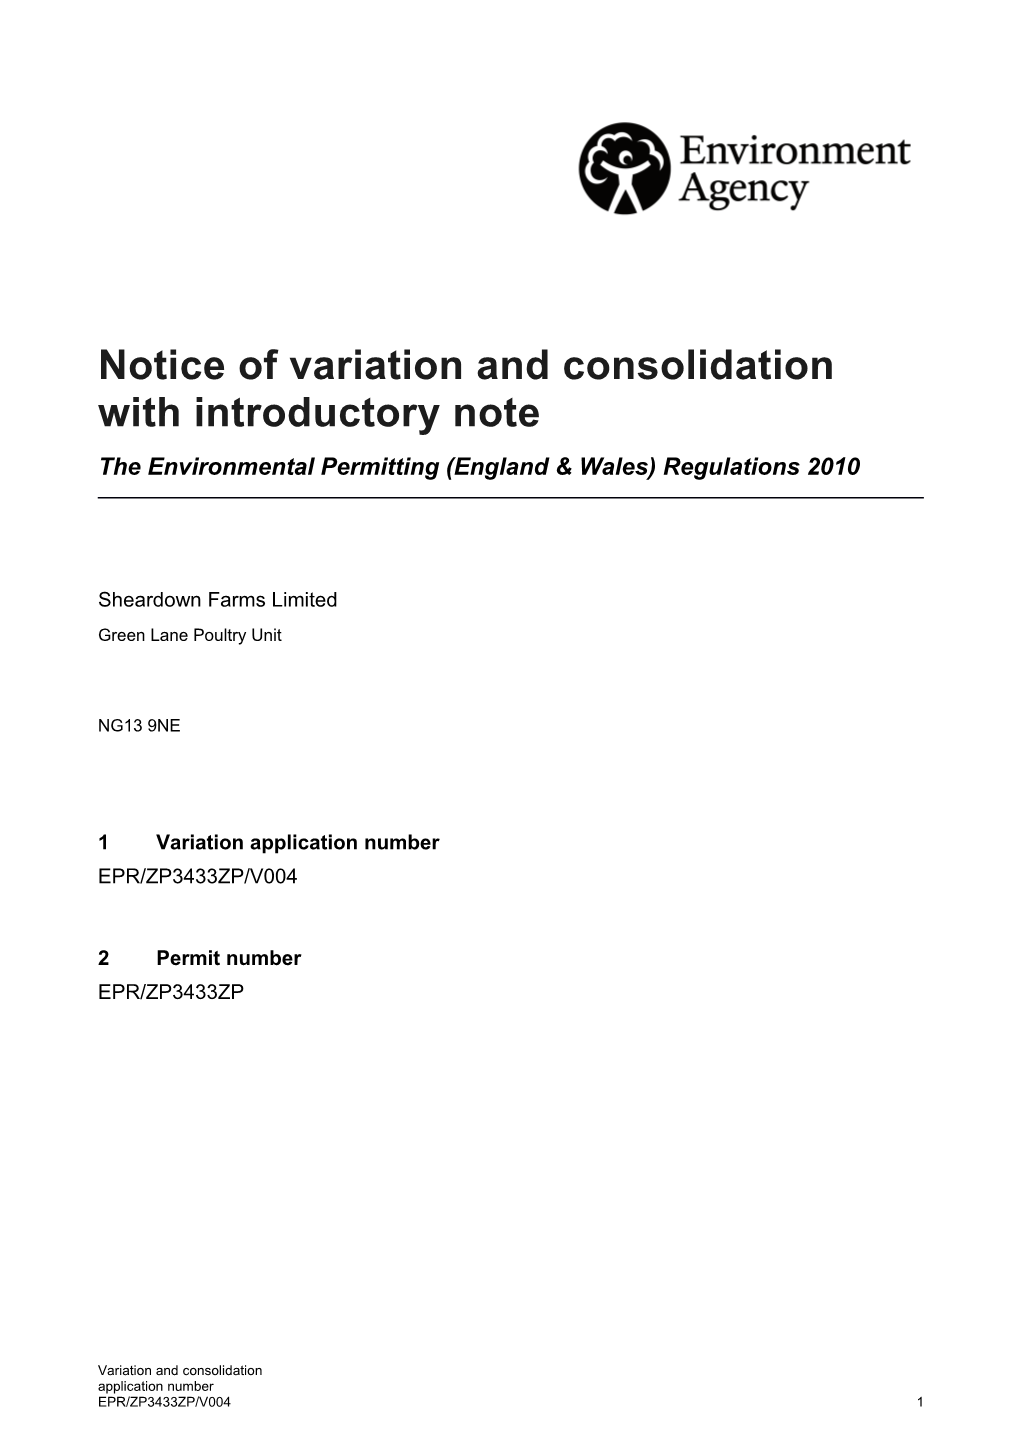 Notice of Variation and Consolidation with Introductory Note